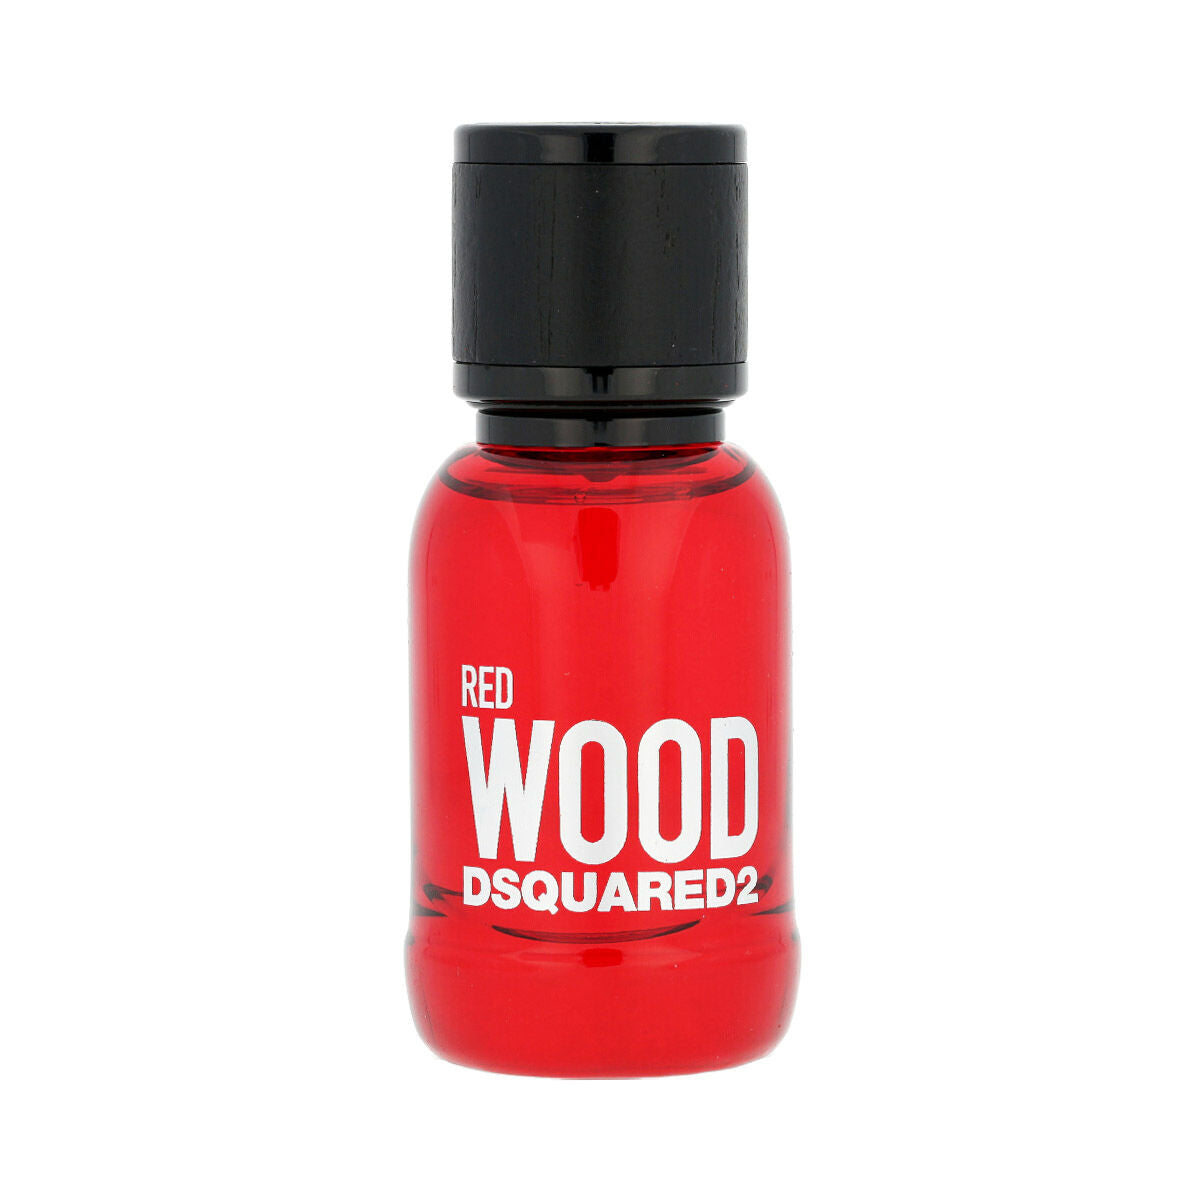 Women's Perfume Dsquared2 EDT Red Wood 30 ml